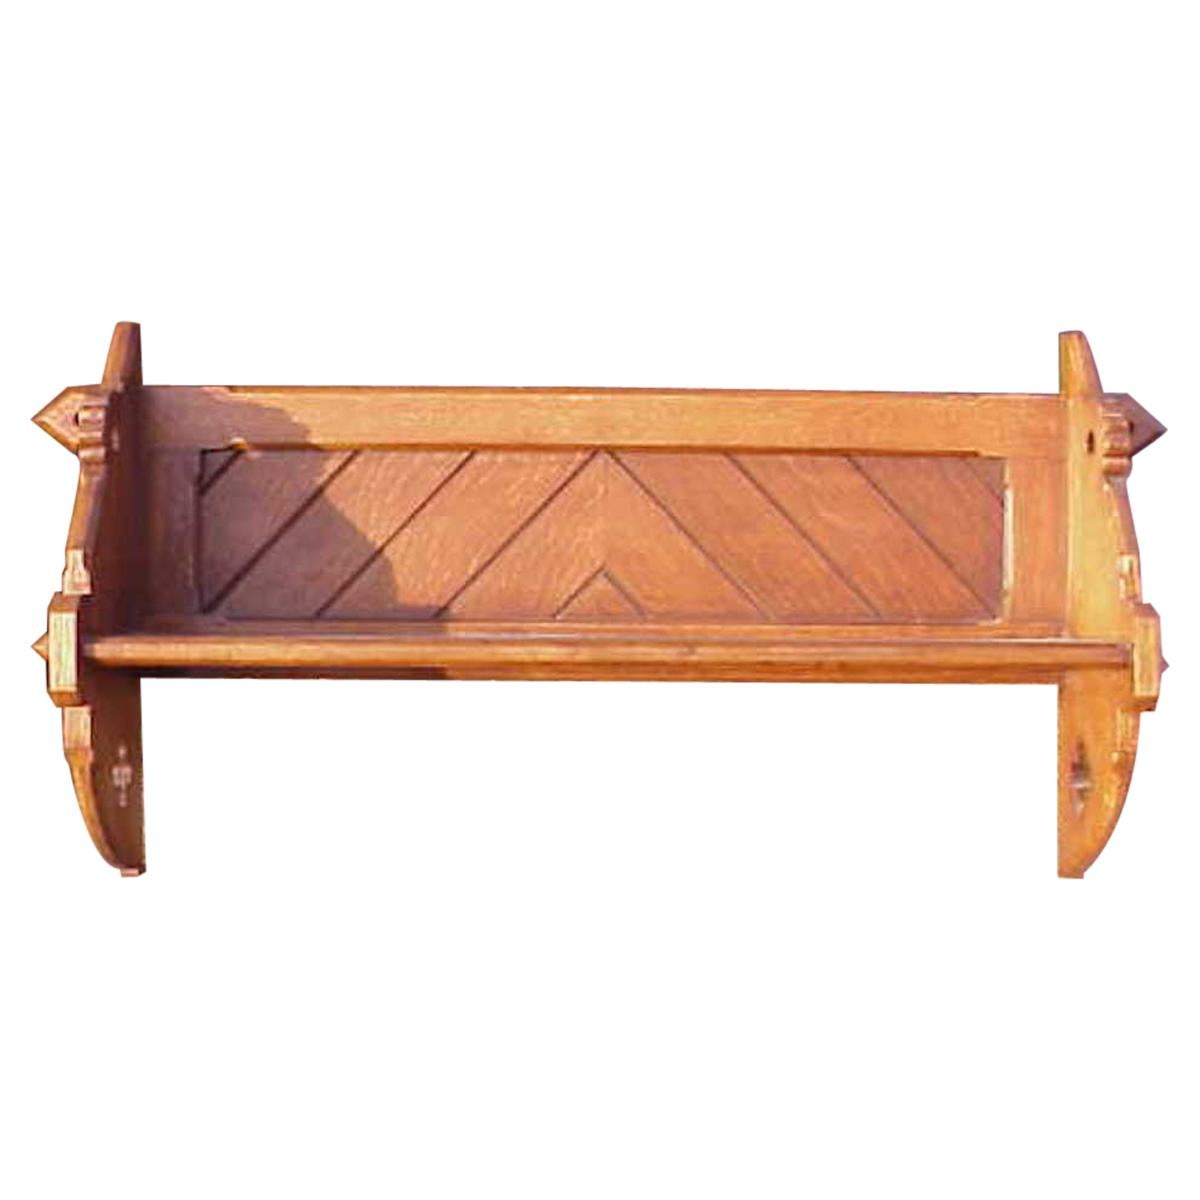 Charles Bevan Style a Gothic Revival Hanging Oak Shelf with through Tenon Joints For Sale